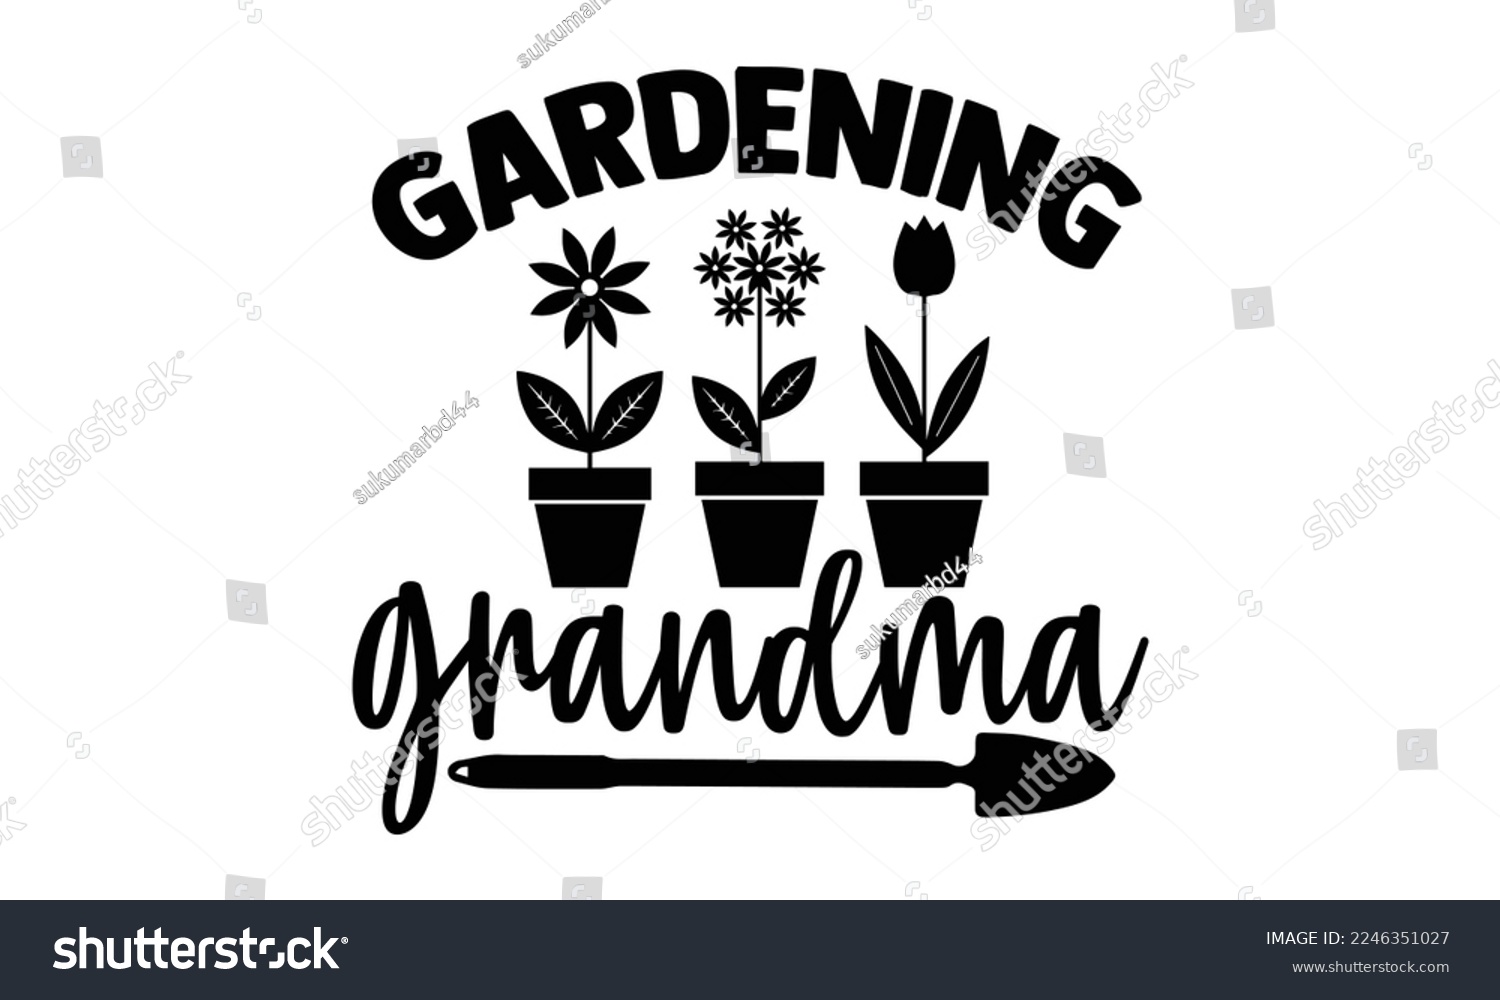 SVG of Gardening Grandma - Gardening T-shirt Design, Illustration for prints on bags, posters, cards, mugs, svg for Cutting Machine, Silhouette Cameo and Hand drawn lettering phrase. svg